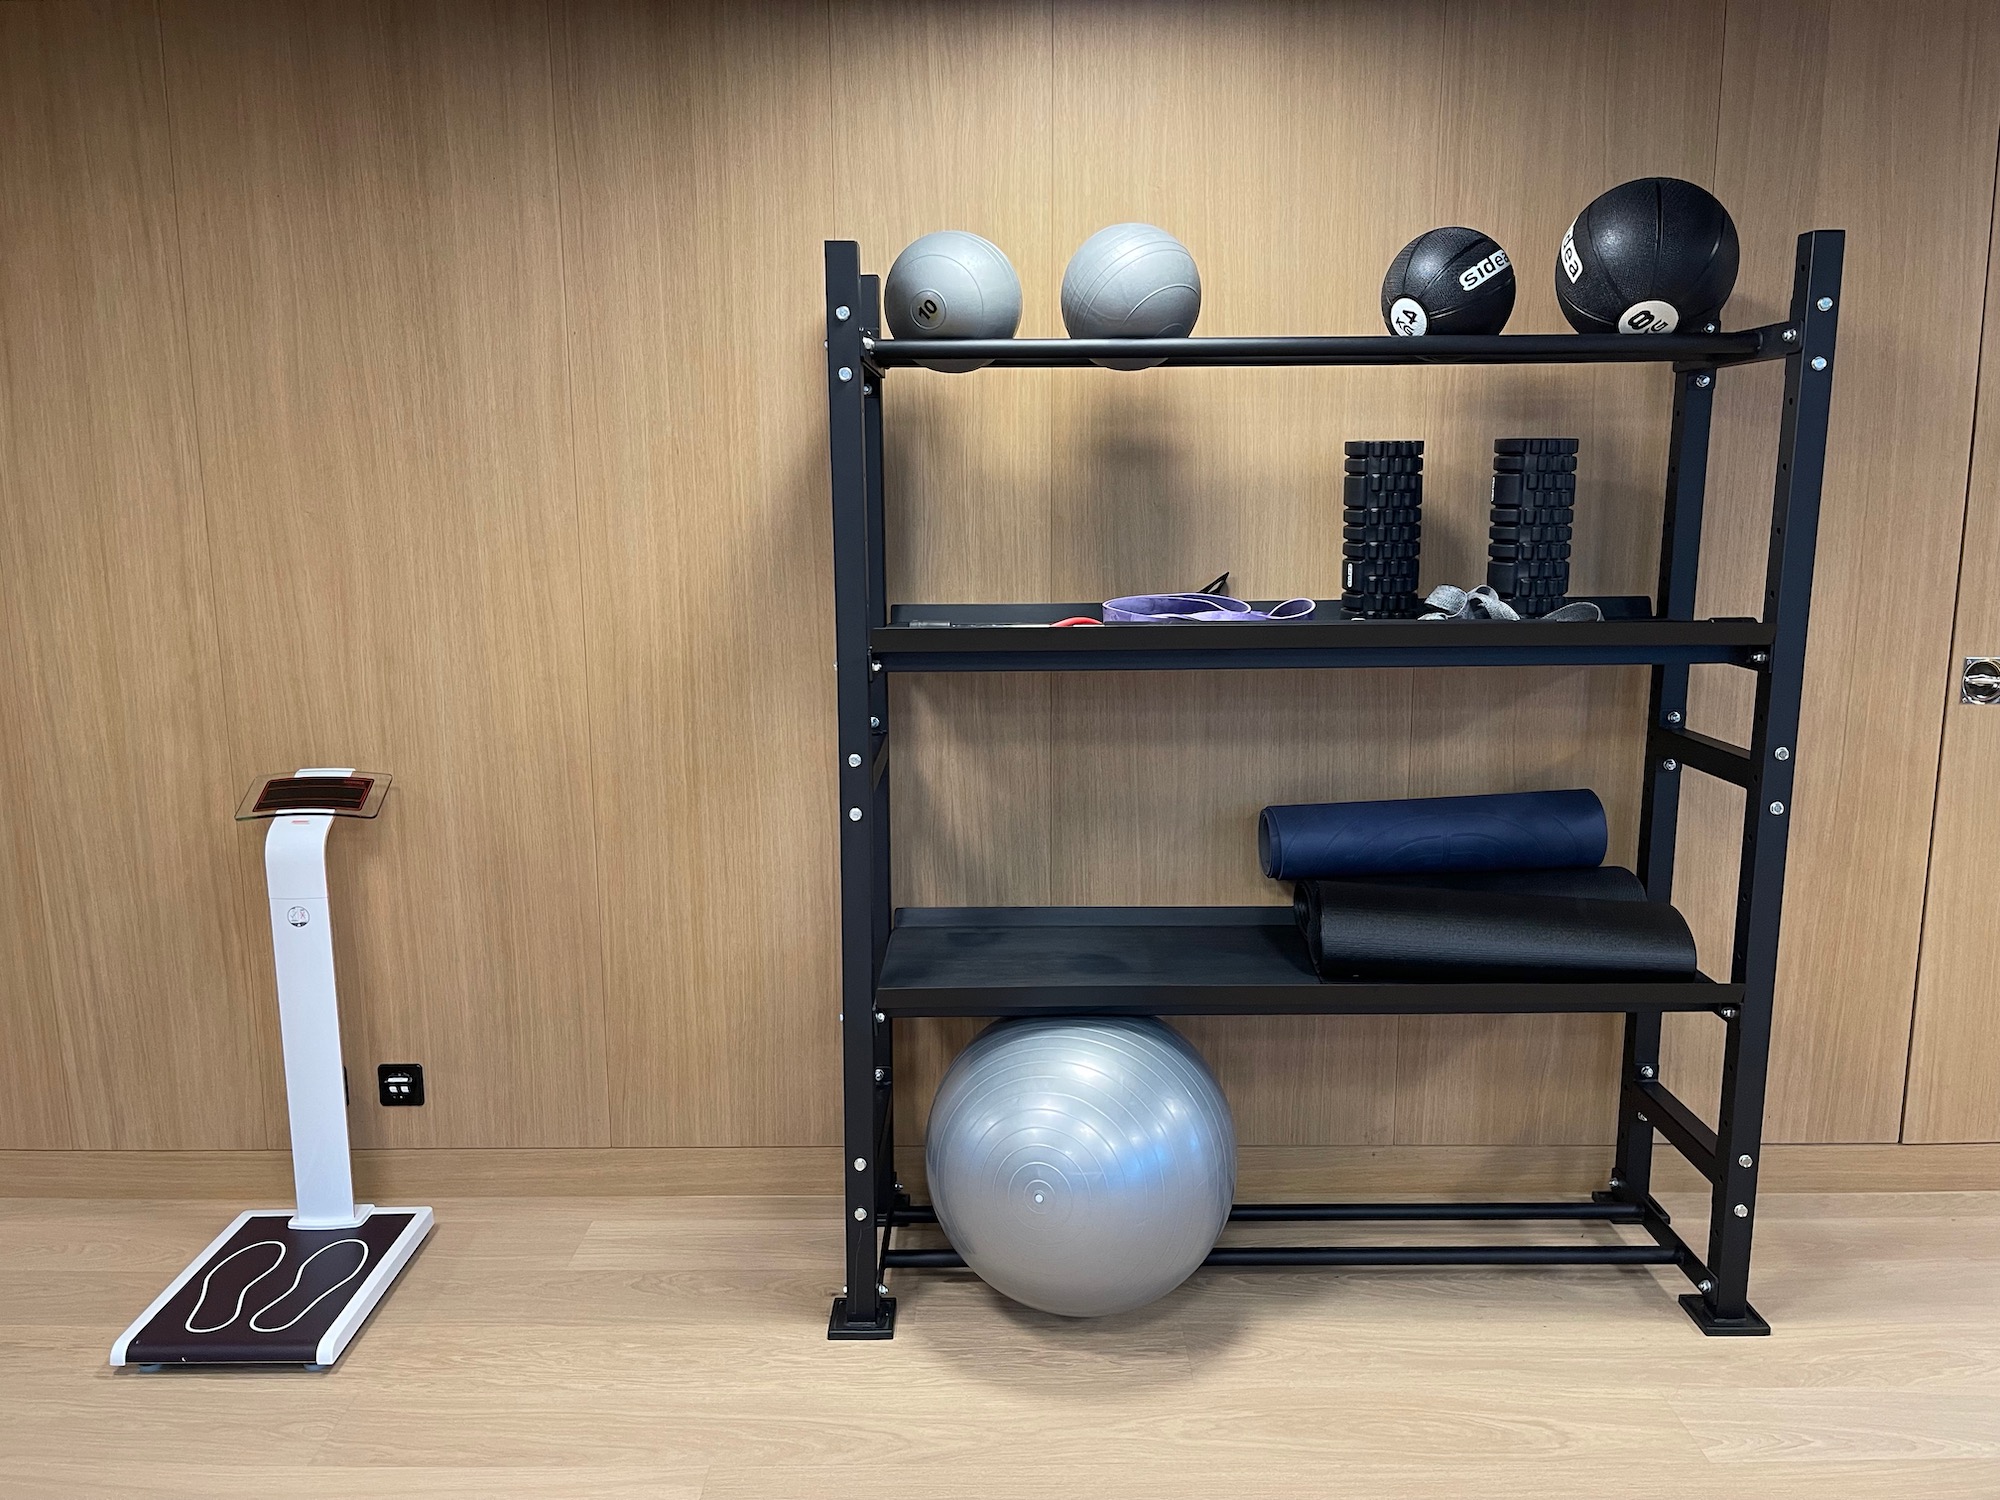 a shelf with a ball and yoga mat on it